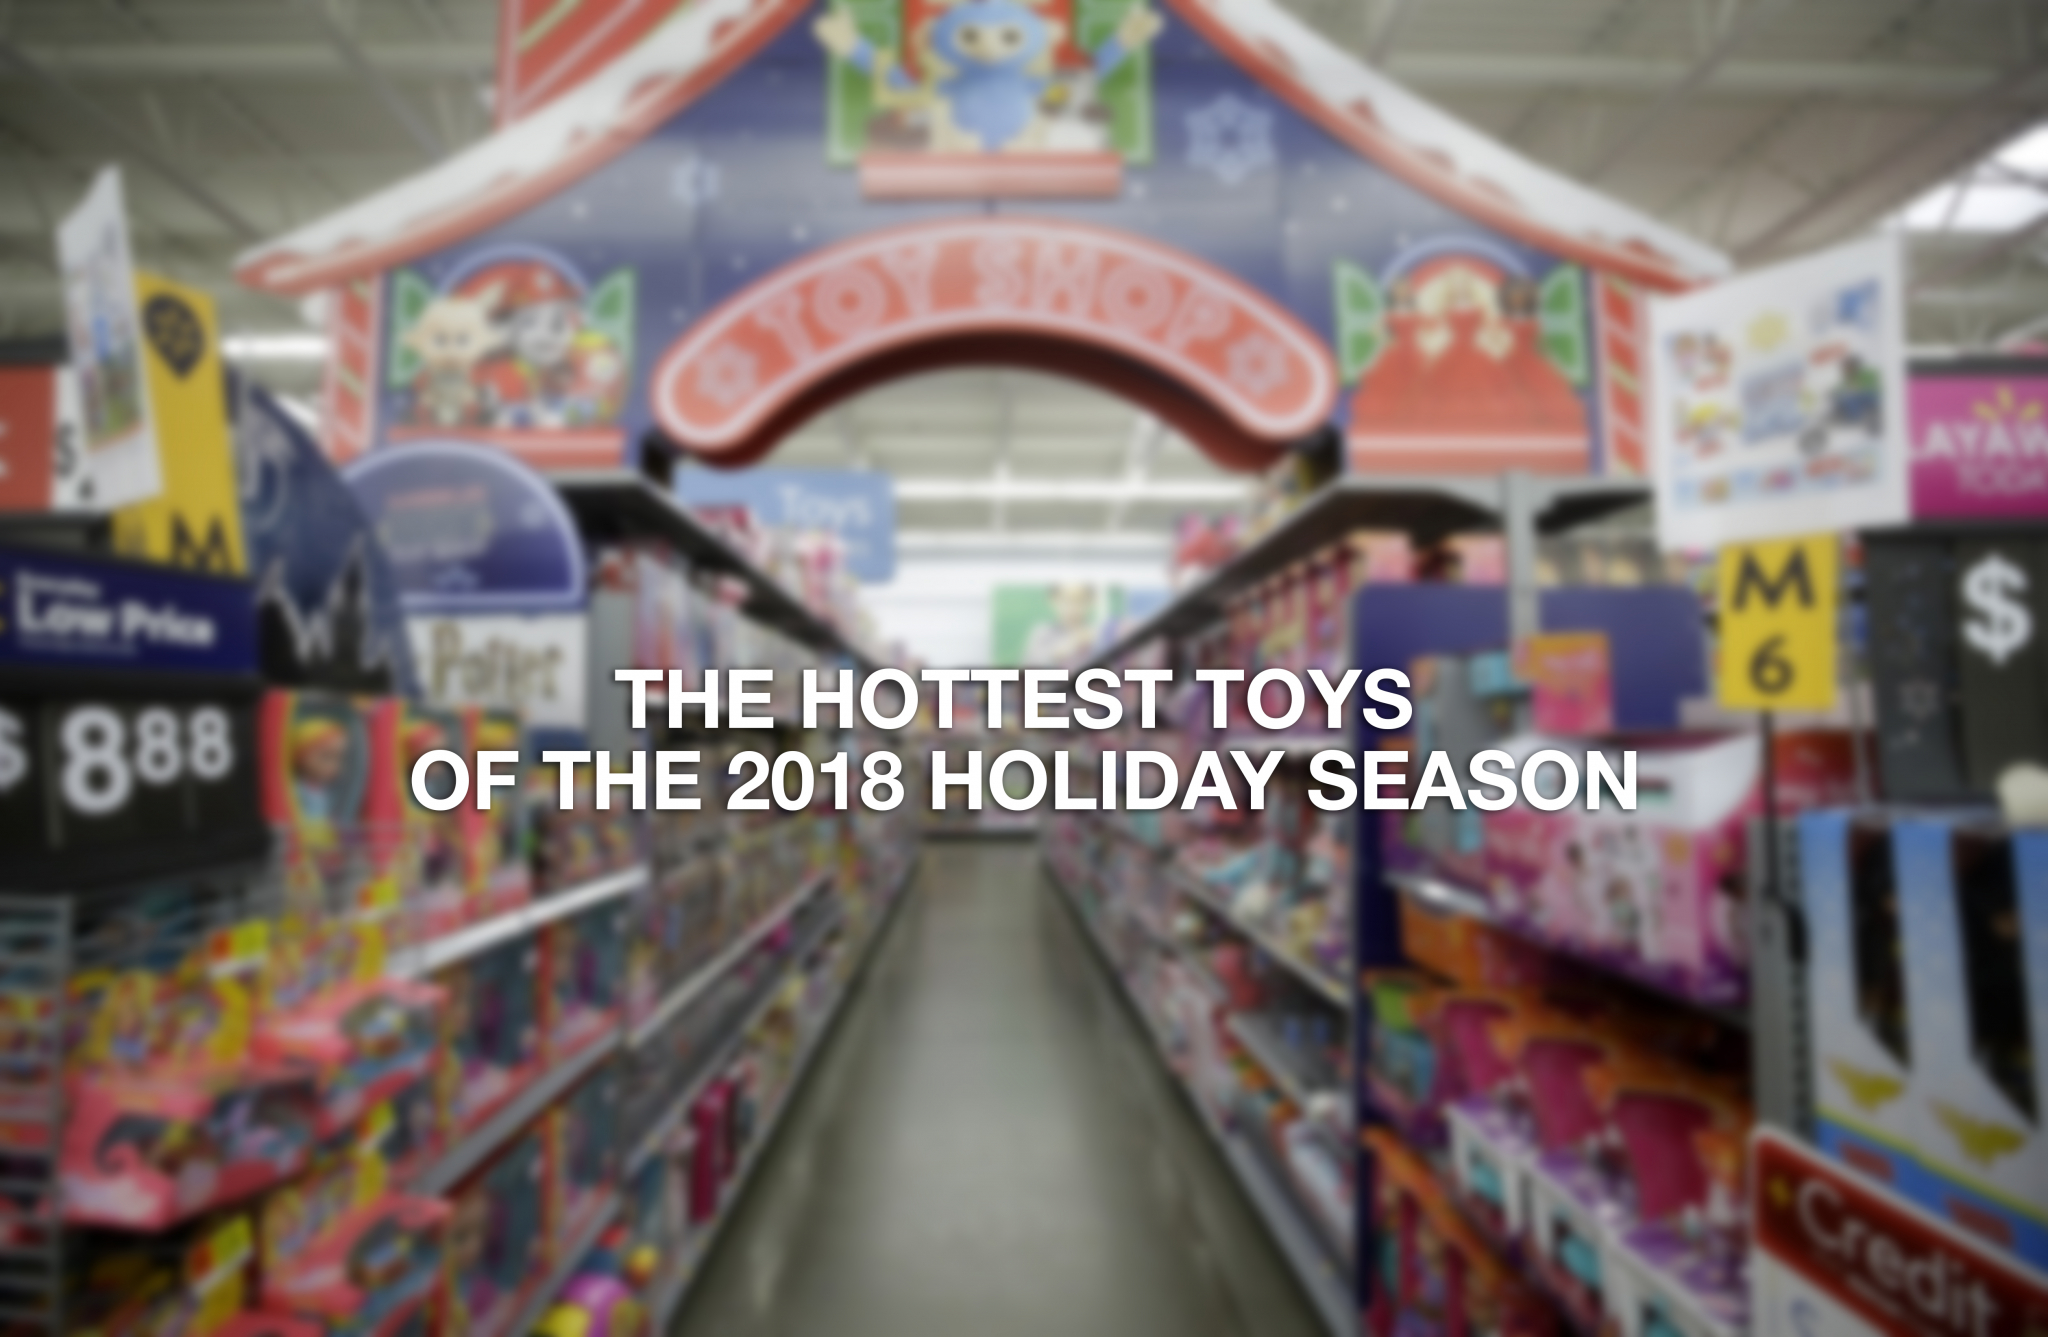 PHOTOS These are the hottest toys this holiday season